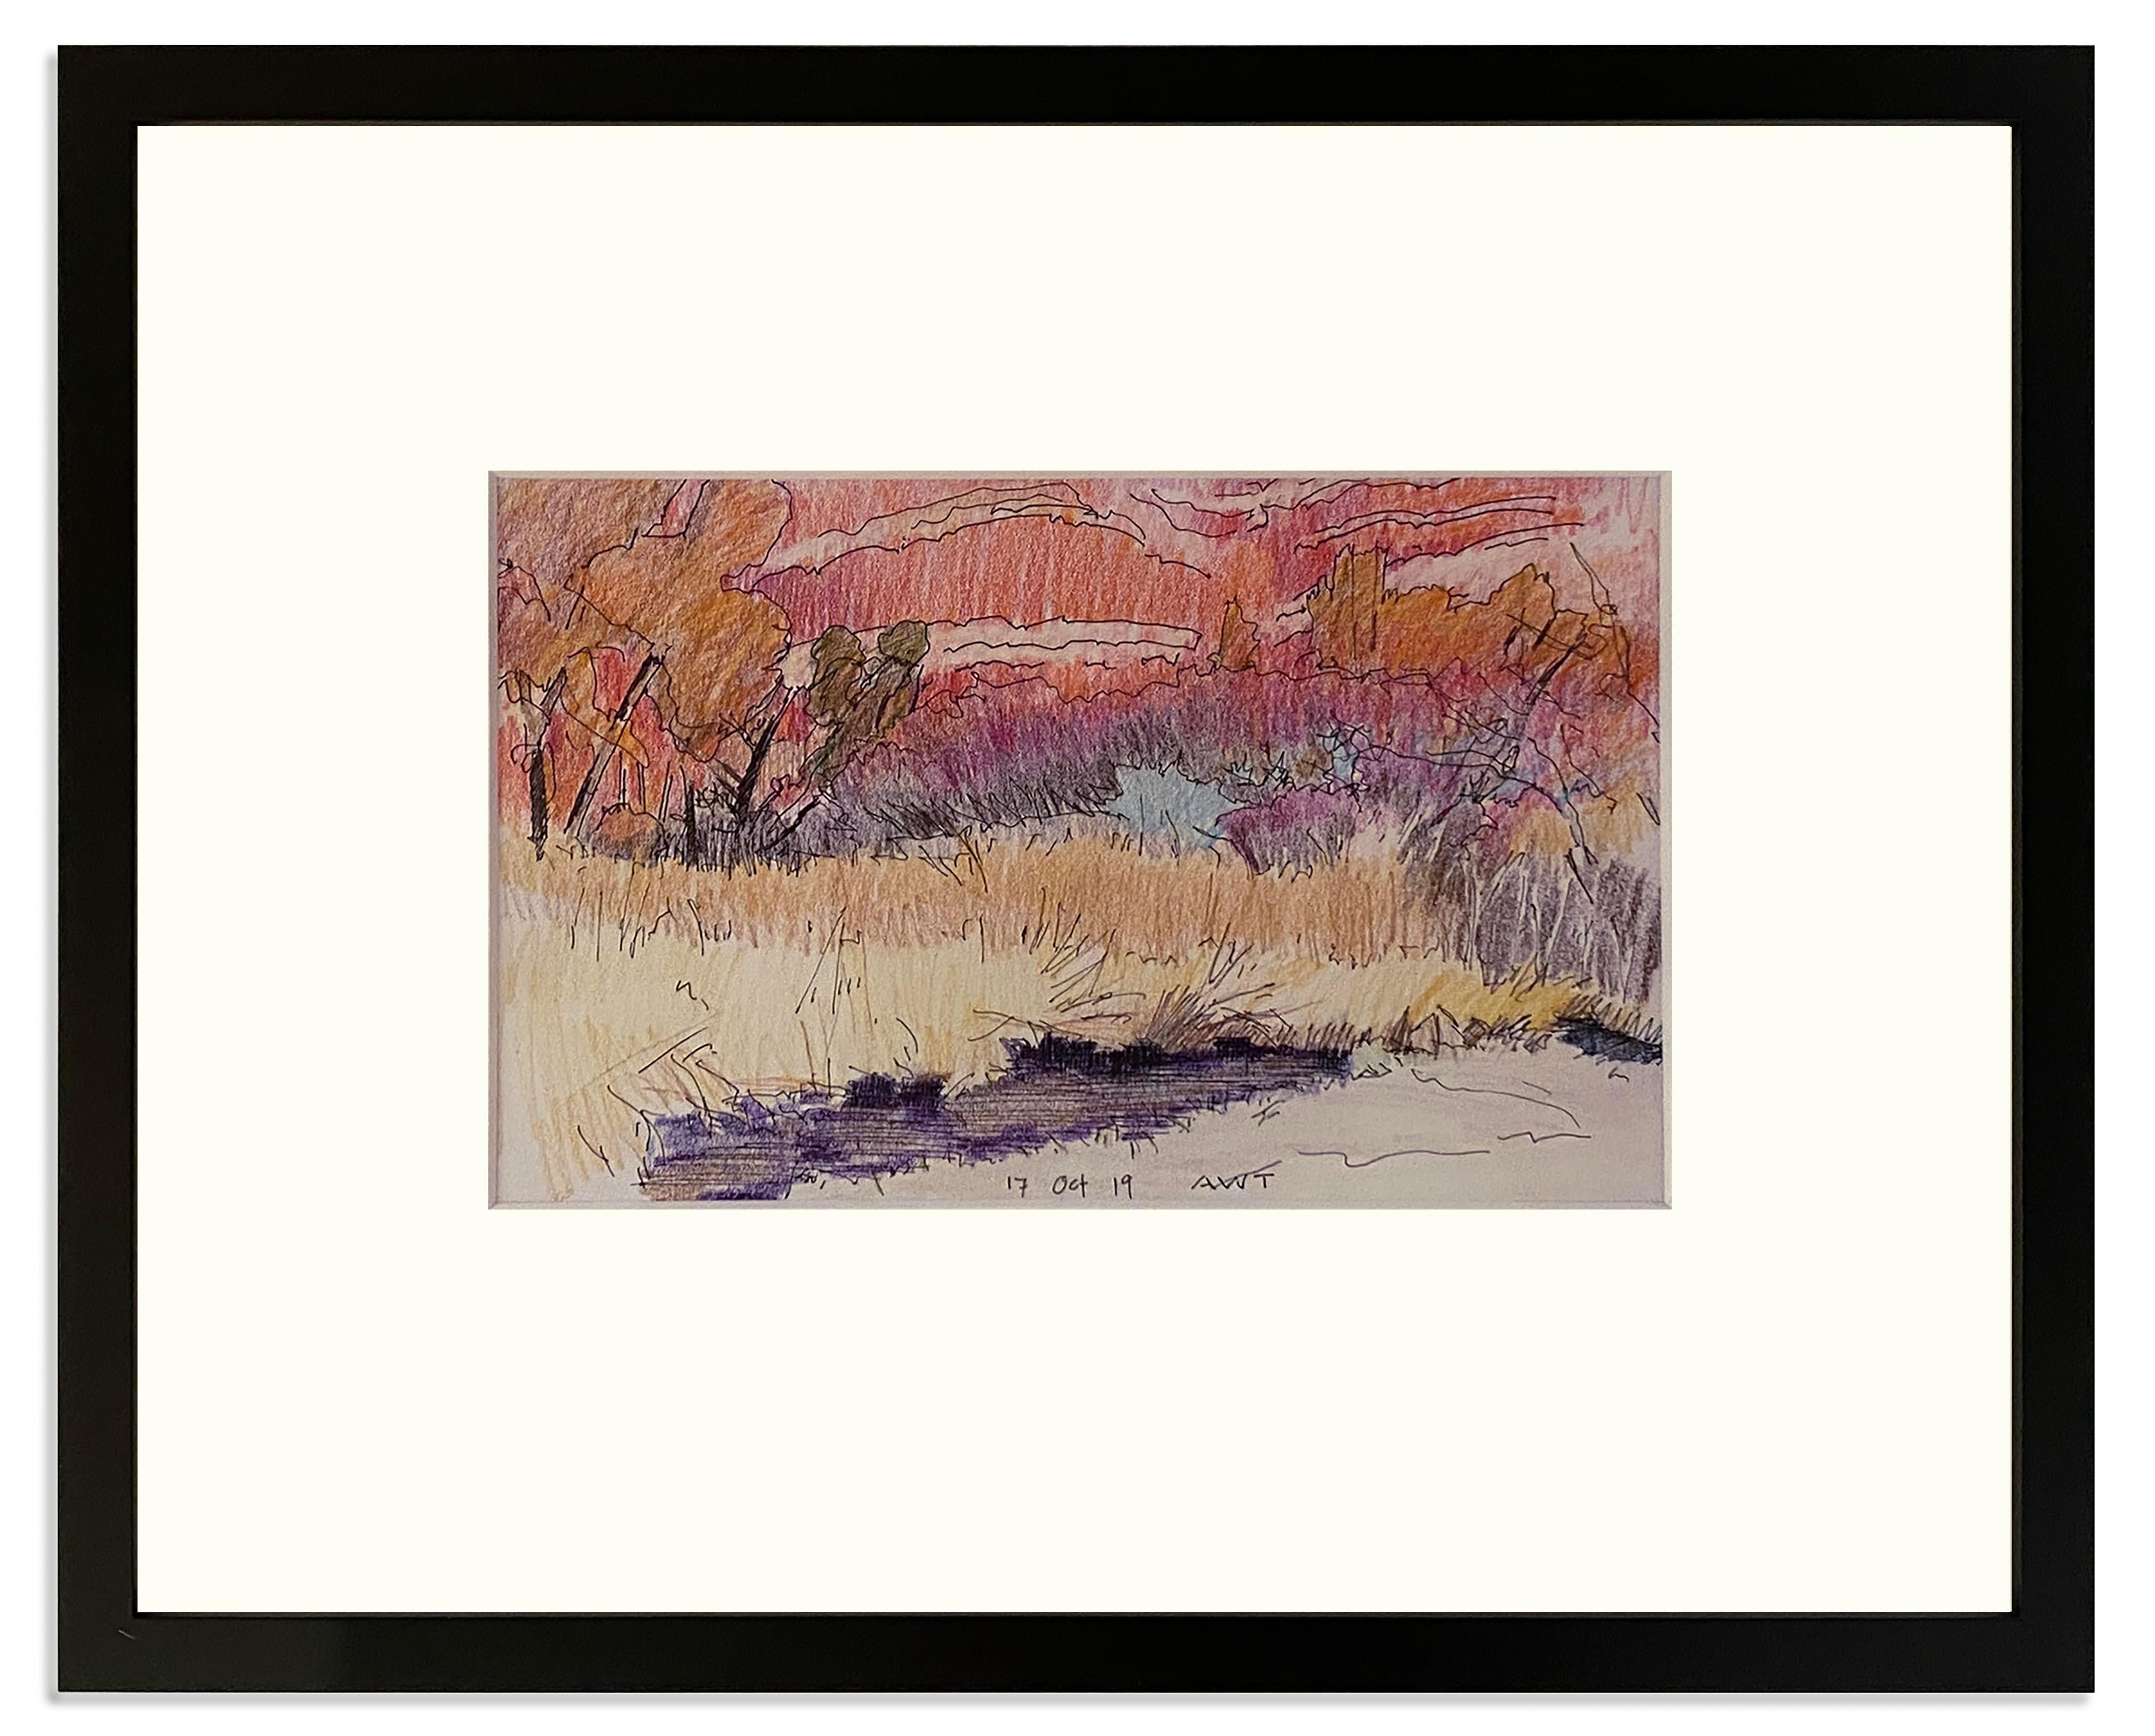 Andy Taylor Abstract Drawing - 17 Oct 19 - horizontal (Colored pencil, paper, study, pink/purple/gold/orange)